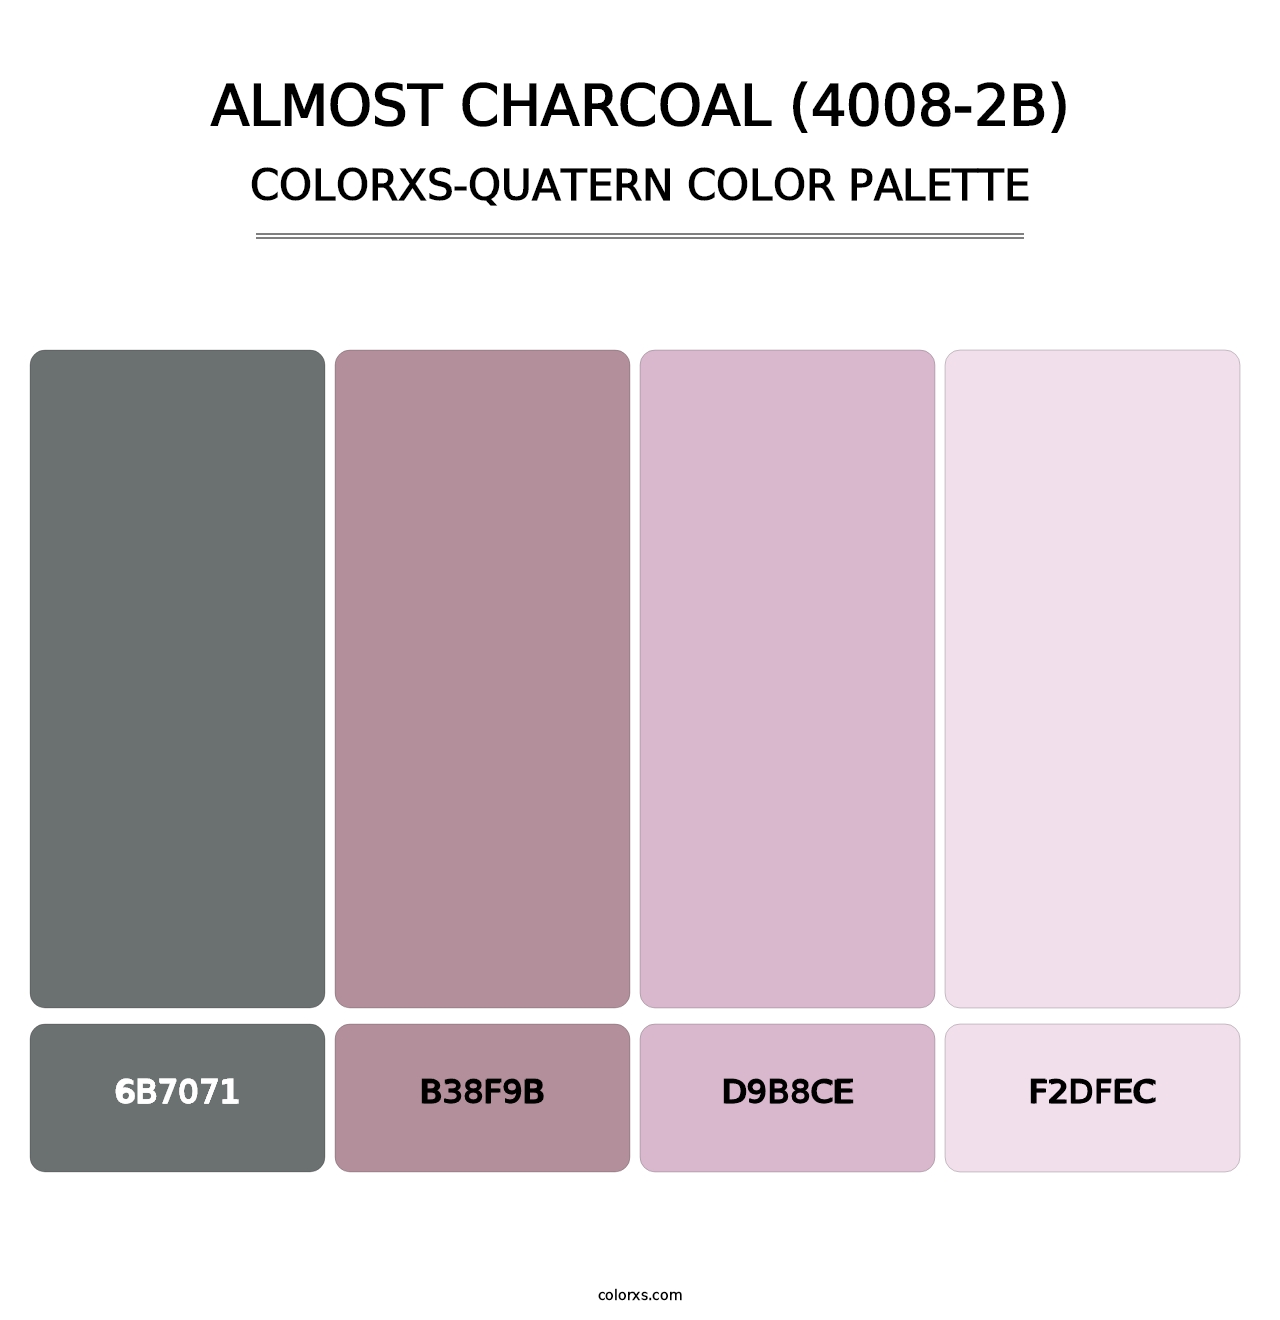 Almost Charcoal (4008-2B) - Colorxs Quatern Palette